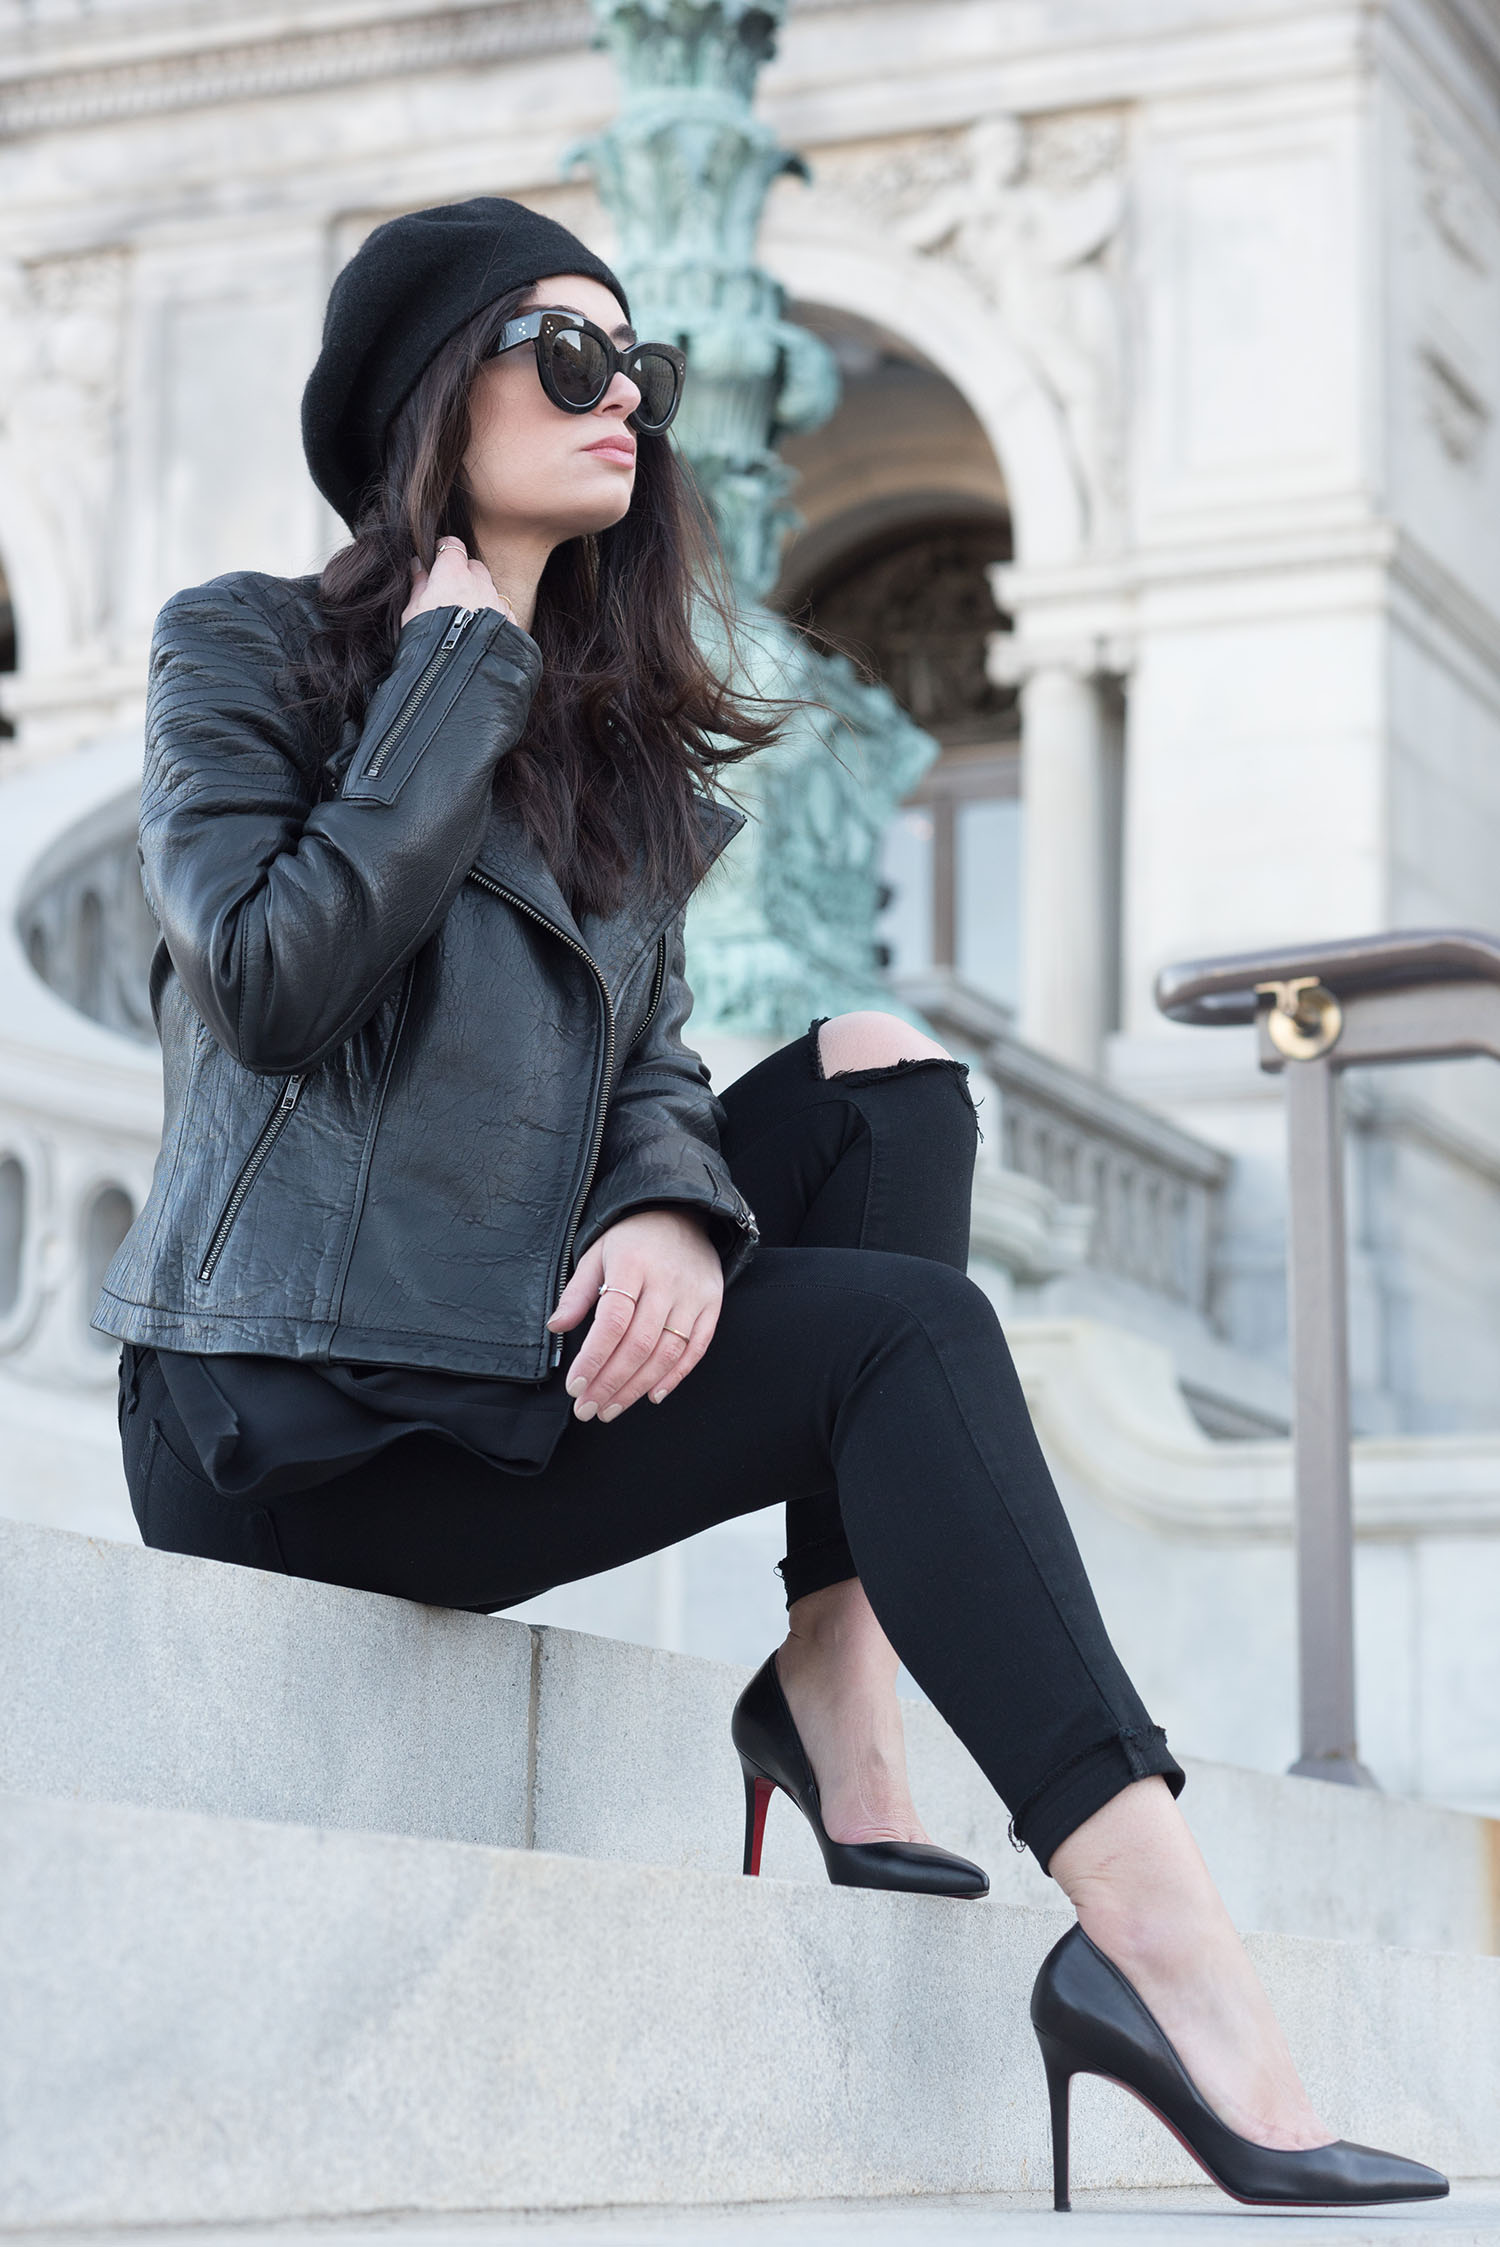 Fashion blogger Cee Fardoe of Coco & Vera sits outside the Library of Congress wearing Celine Audrey sunglasses and an Anthropologie Bonnie beret